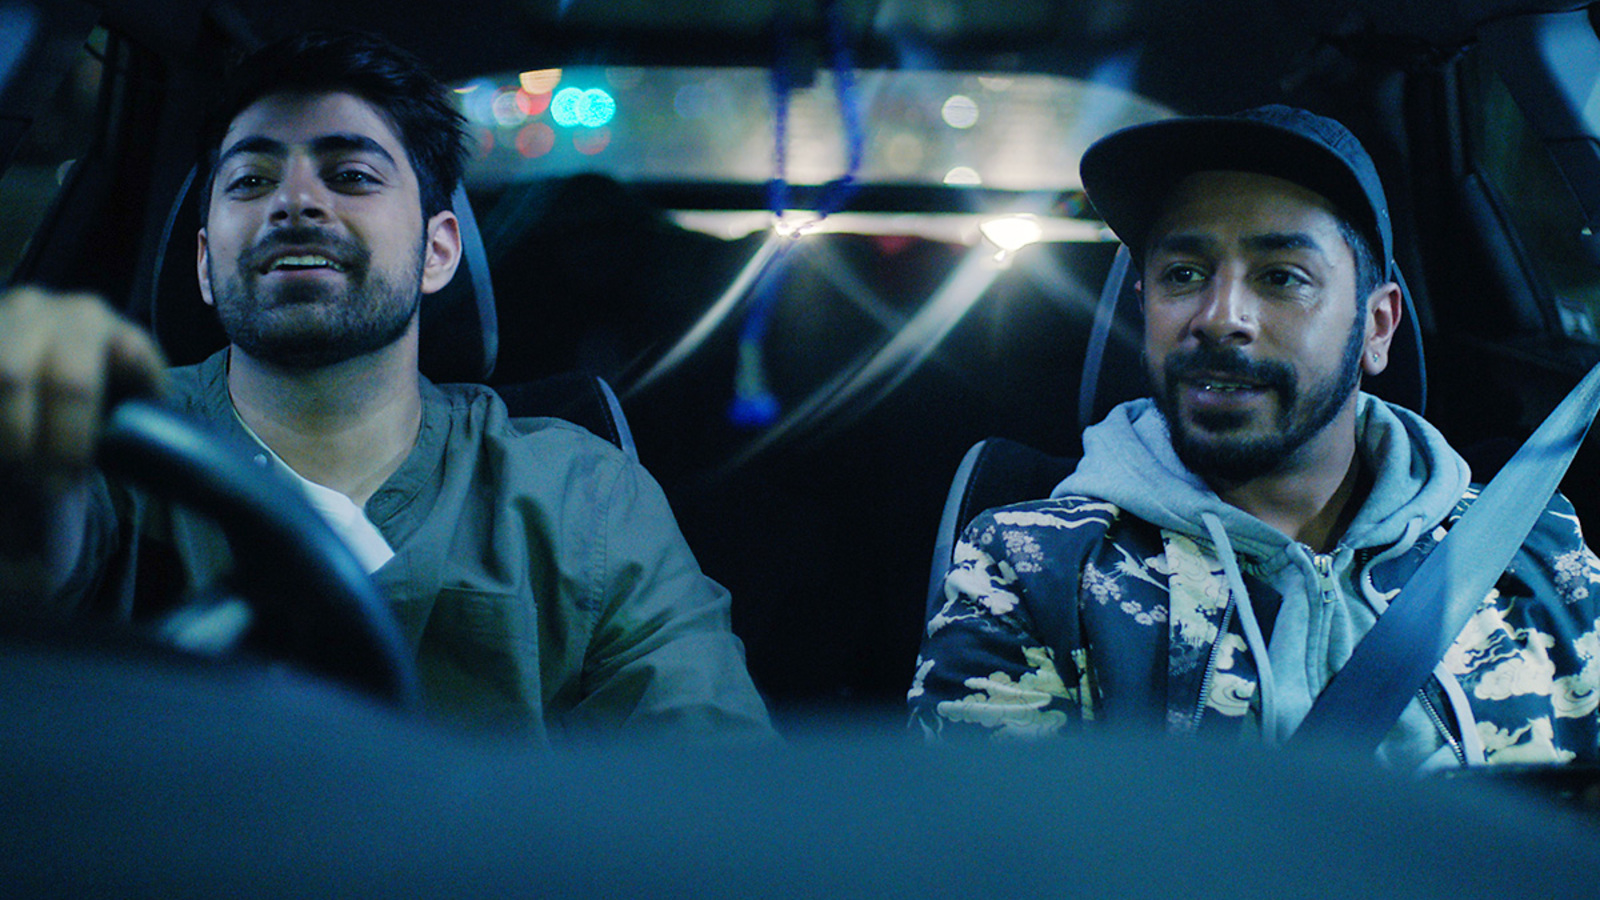 Abz and Sid ride in the car in a scene from TASBEEH